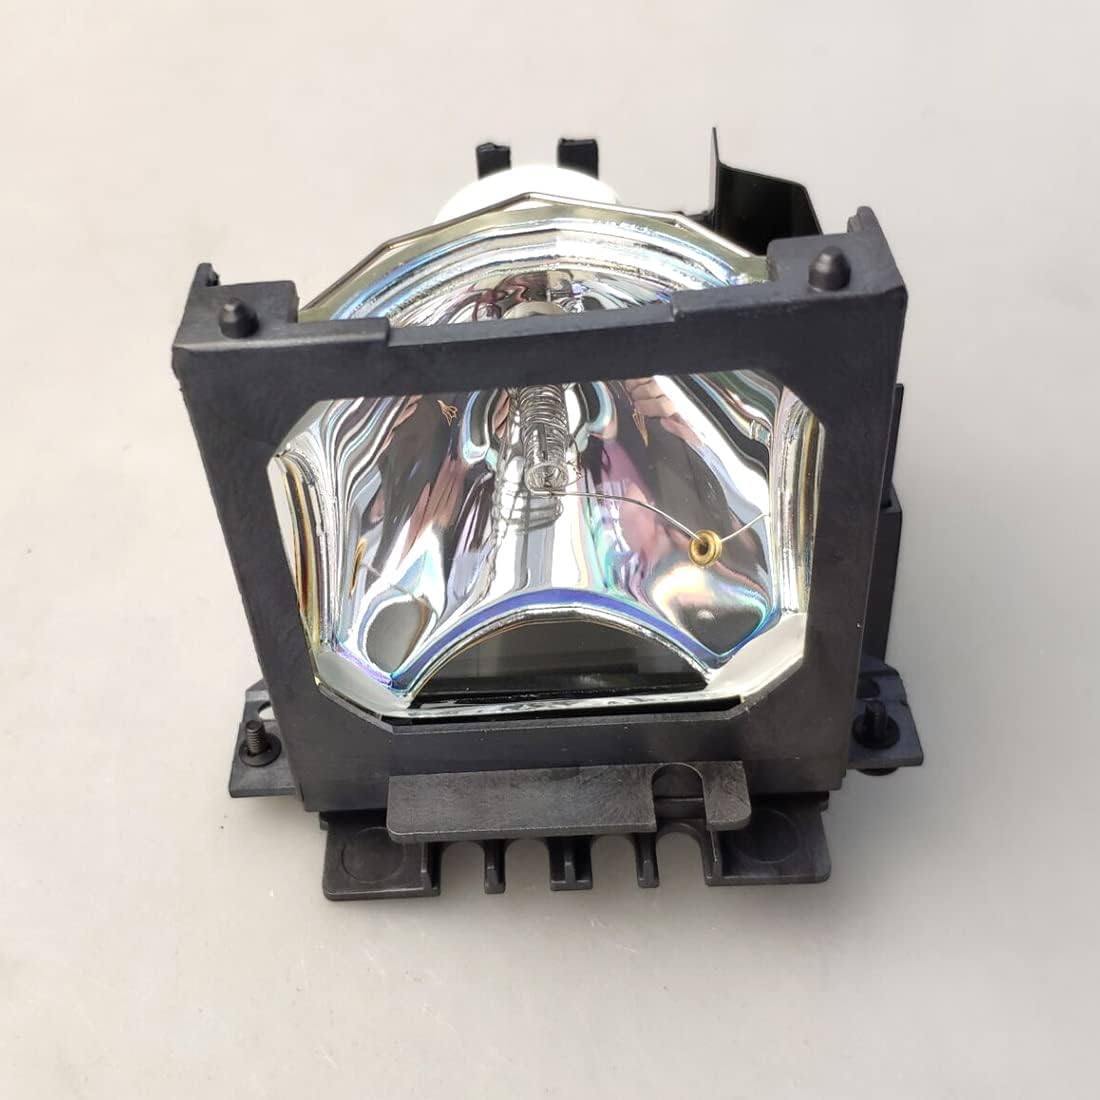 Replacement Projector lamp DT00591 For Hitachi CP-X1200 CP-X1200W